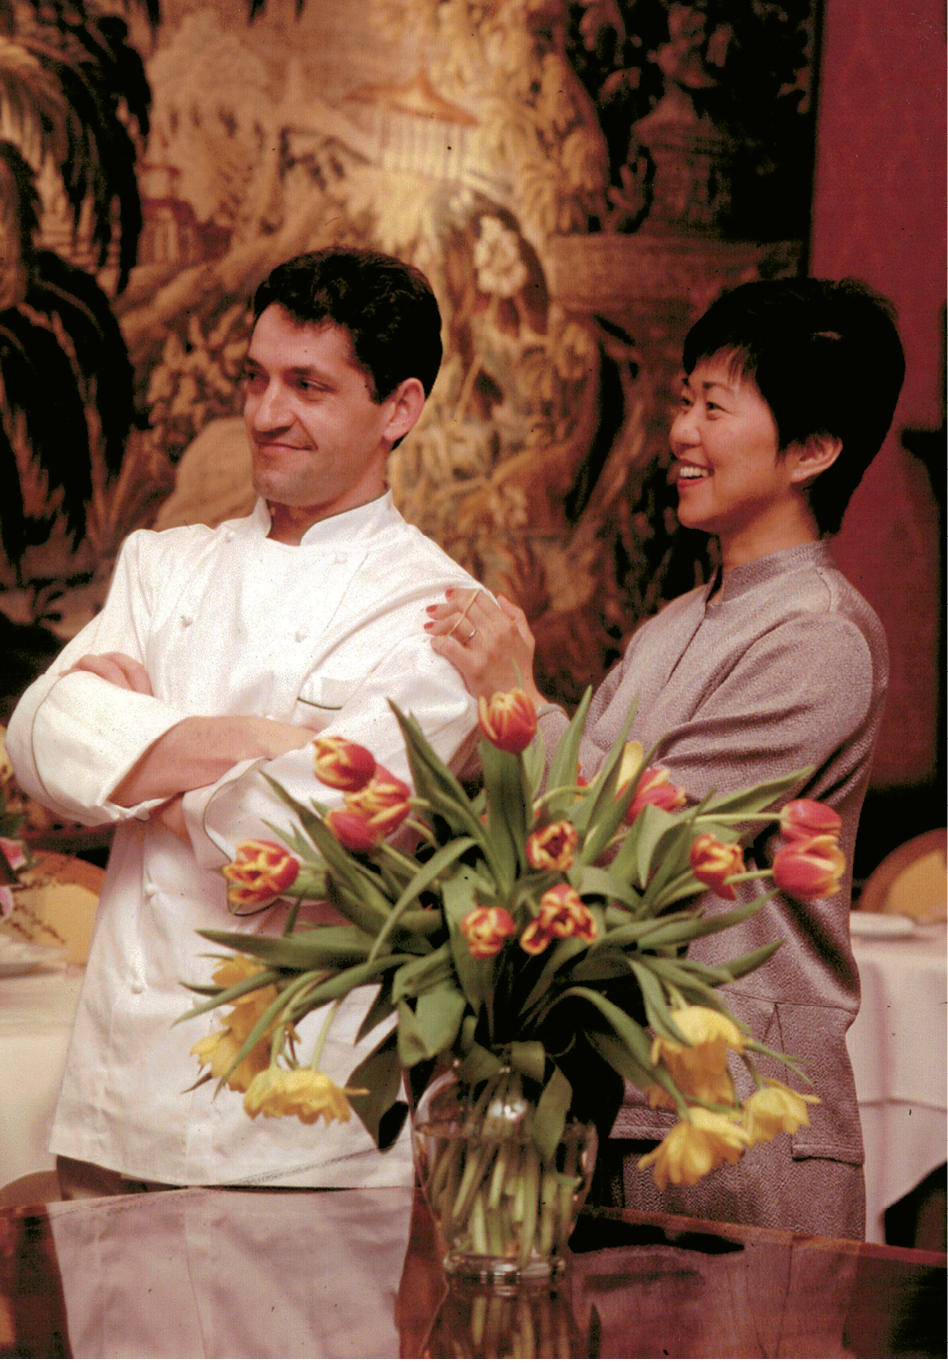 Chef-owner José de Anacleto in the dining room with his wife, Su-Chen; the couple resides in Albertville, France, where they own and operate Hôtel Restaurant Million.